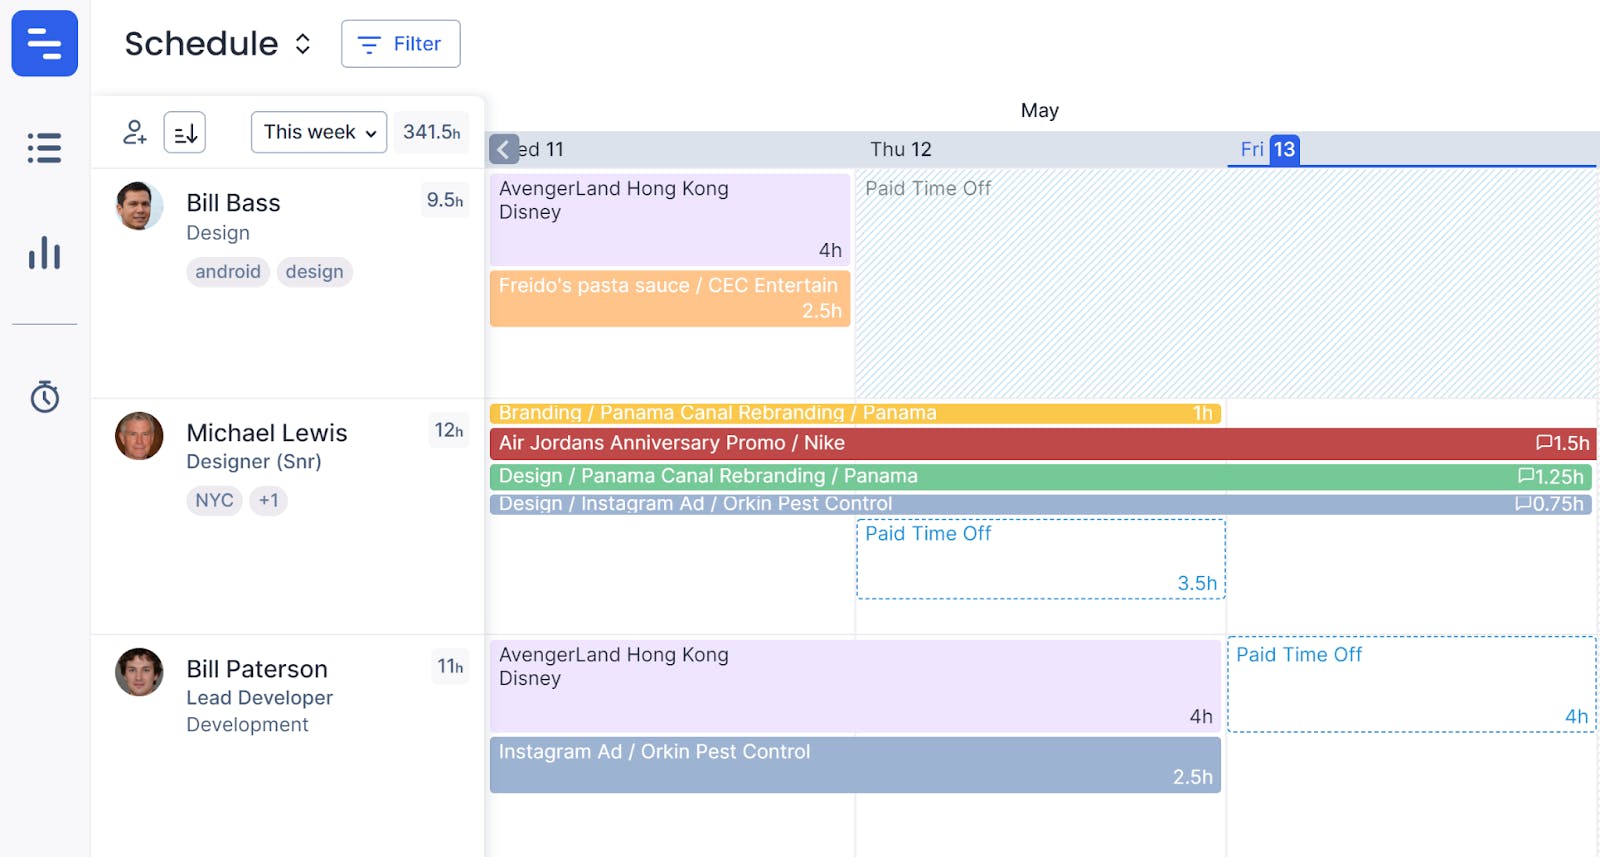 Float's schedule view where you can see teammate's availability